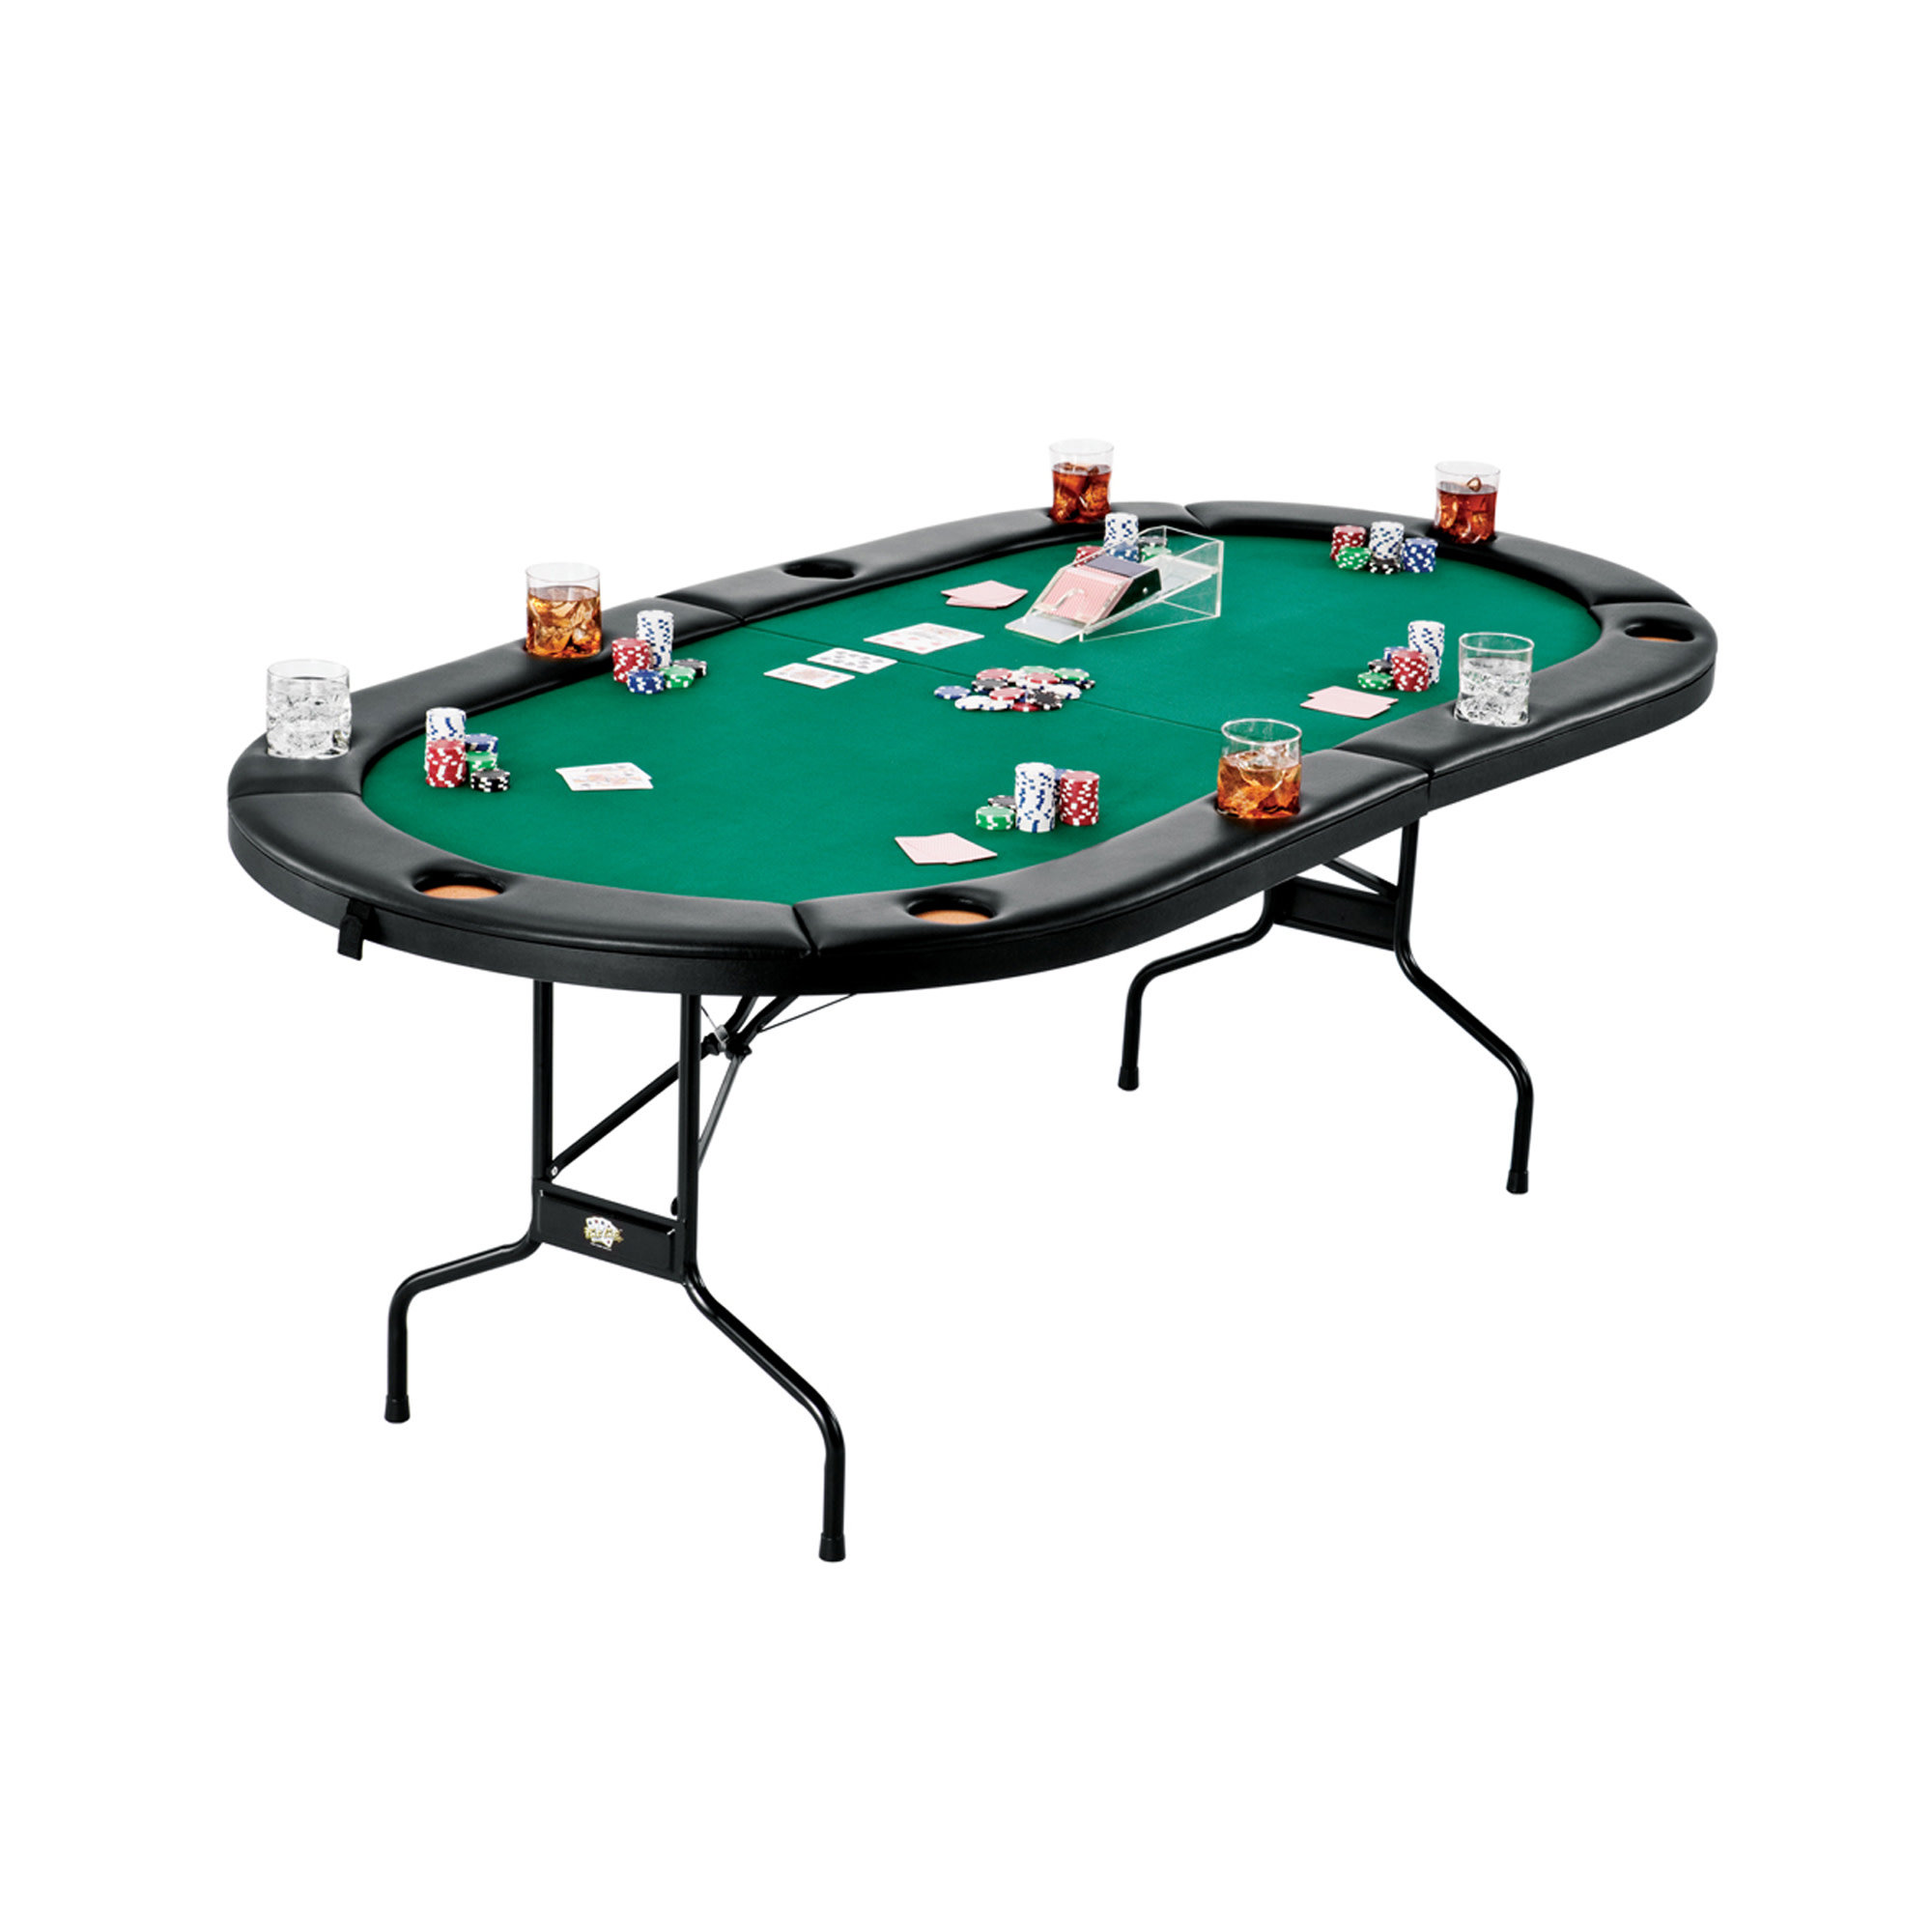 AVAWING 46.9'' 8 - Player Green Foldable Poker Table & Reviews